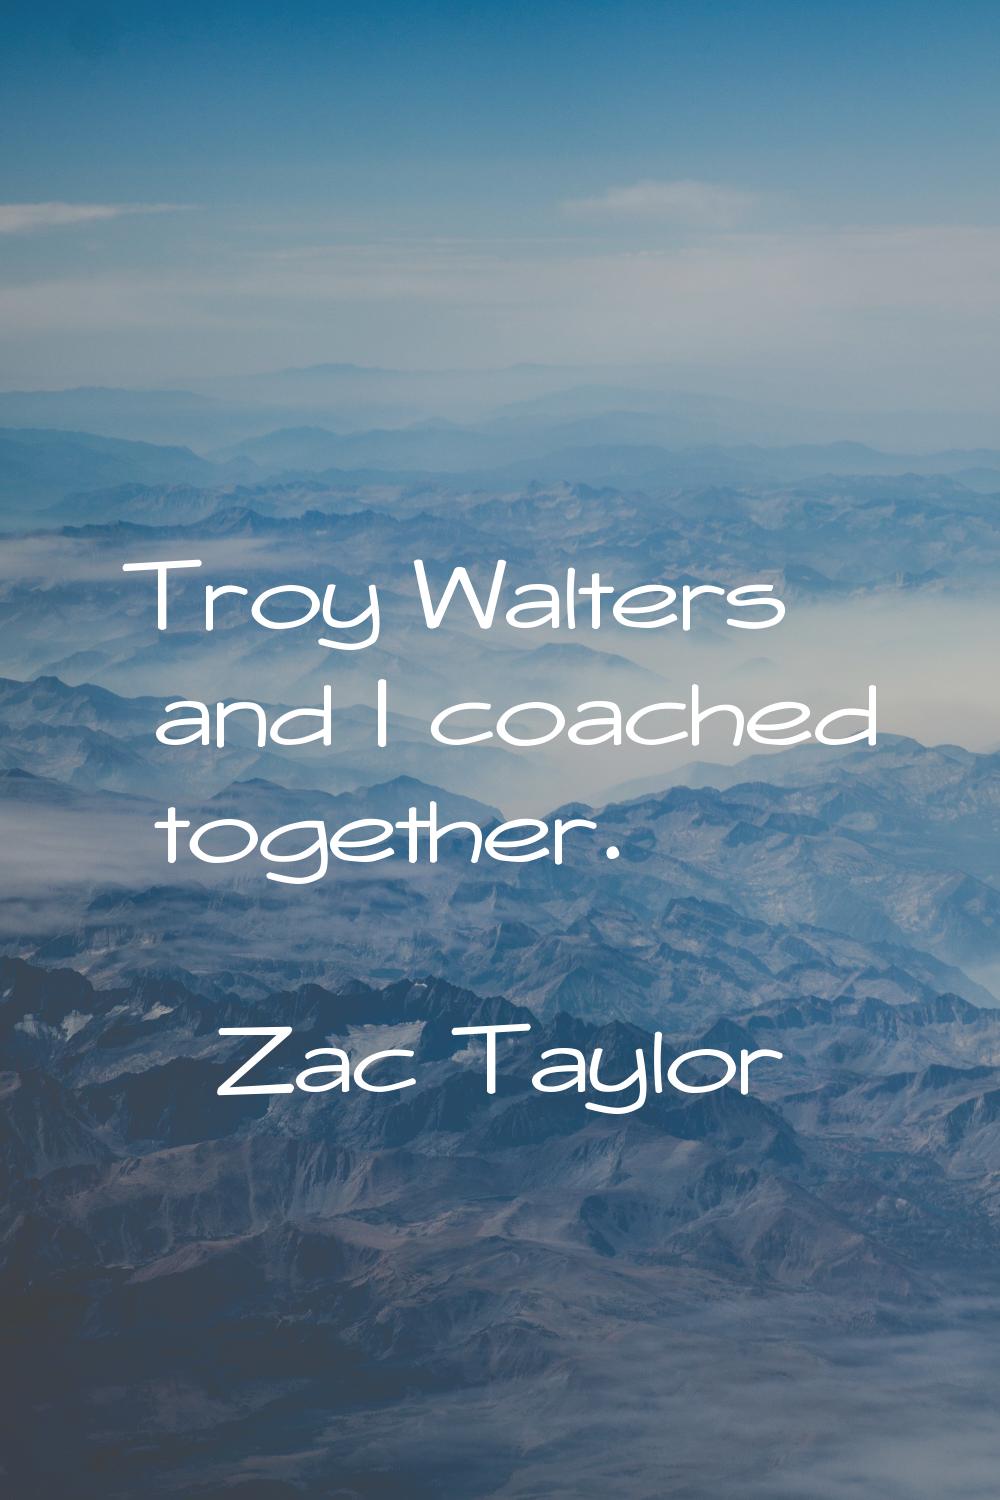 Troy Walters and I coached together.